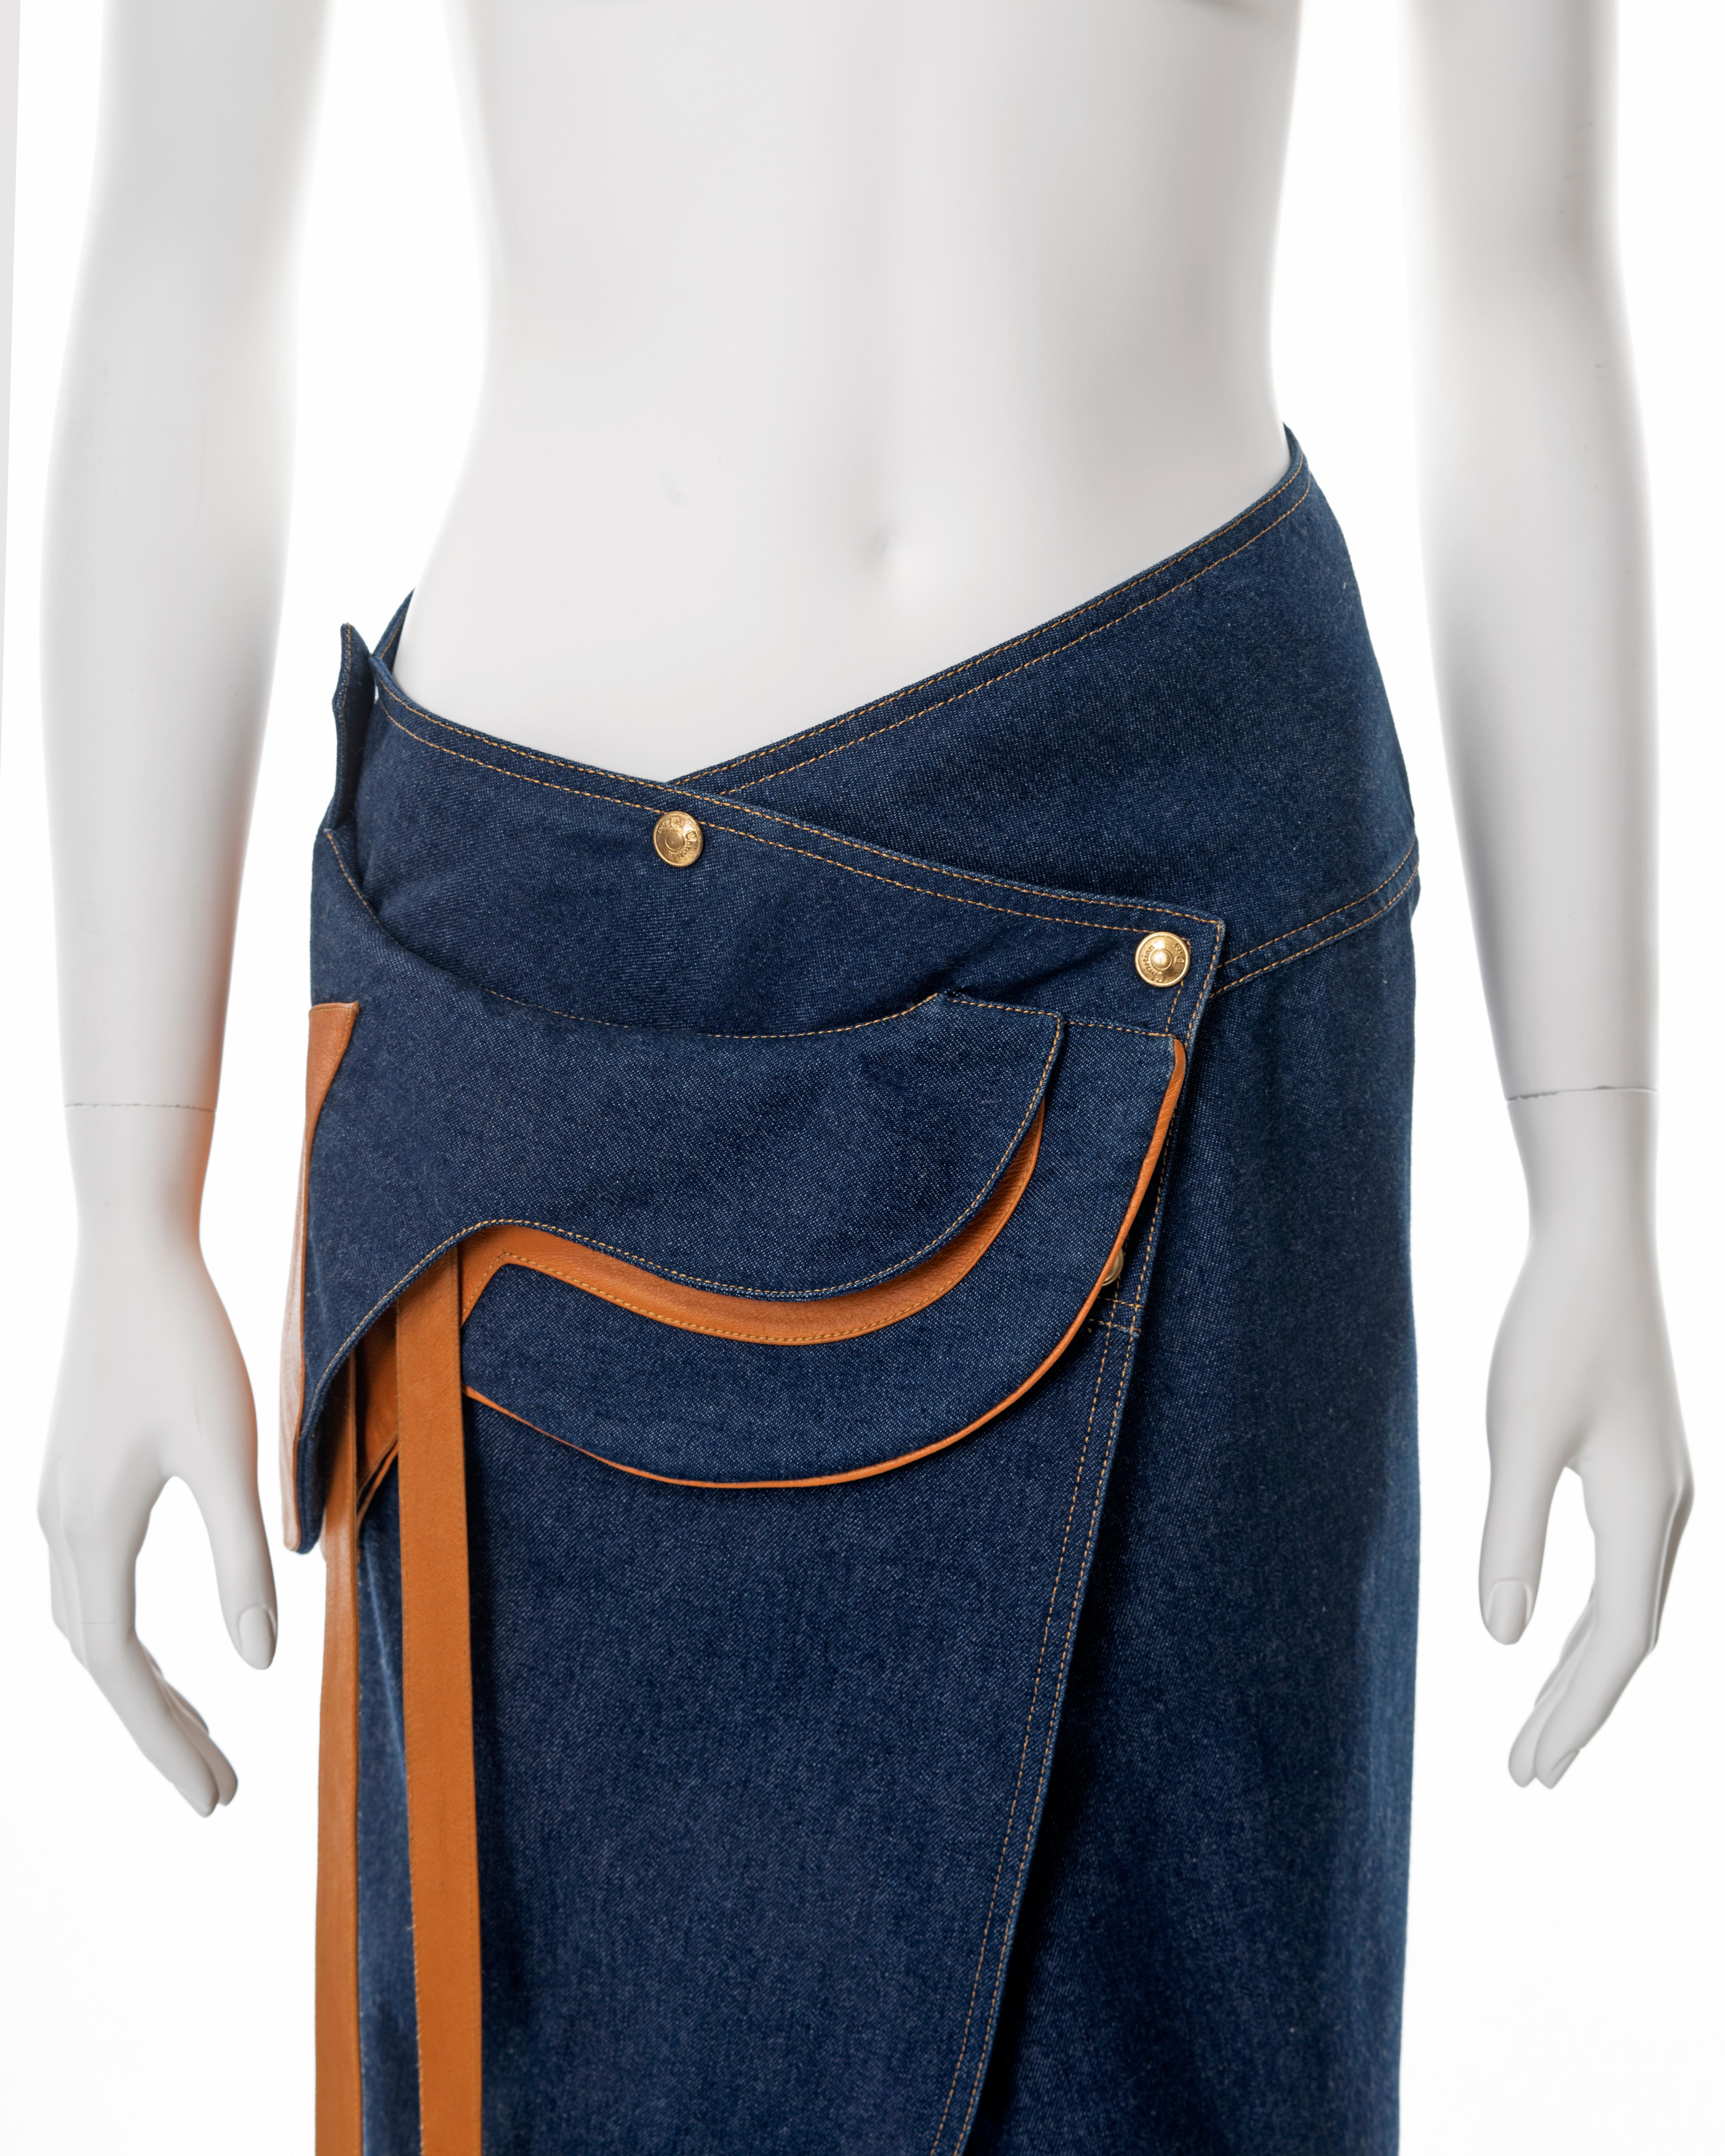 Women's Christian Dior by John Galliano indigo denim and leather saddle skirt, ss 2000 For Sale